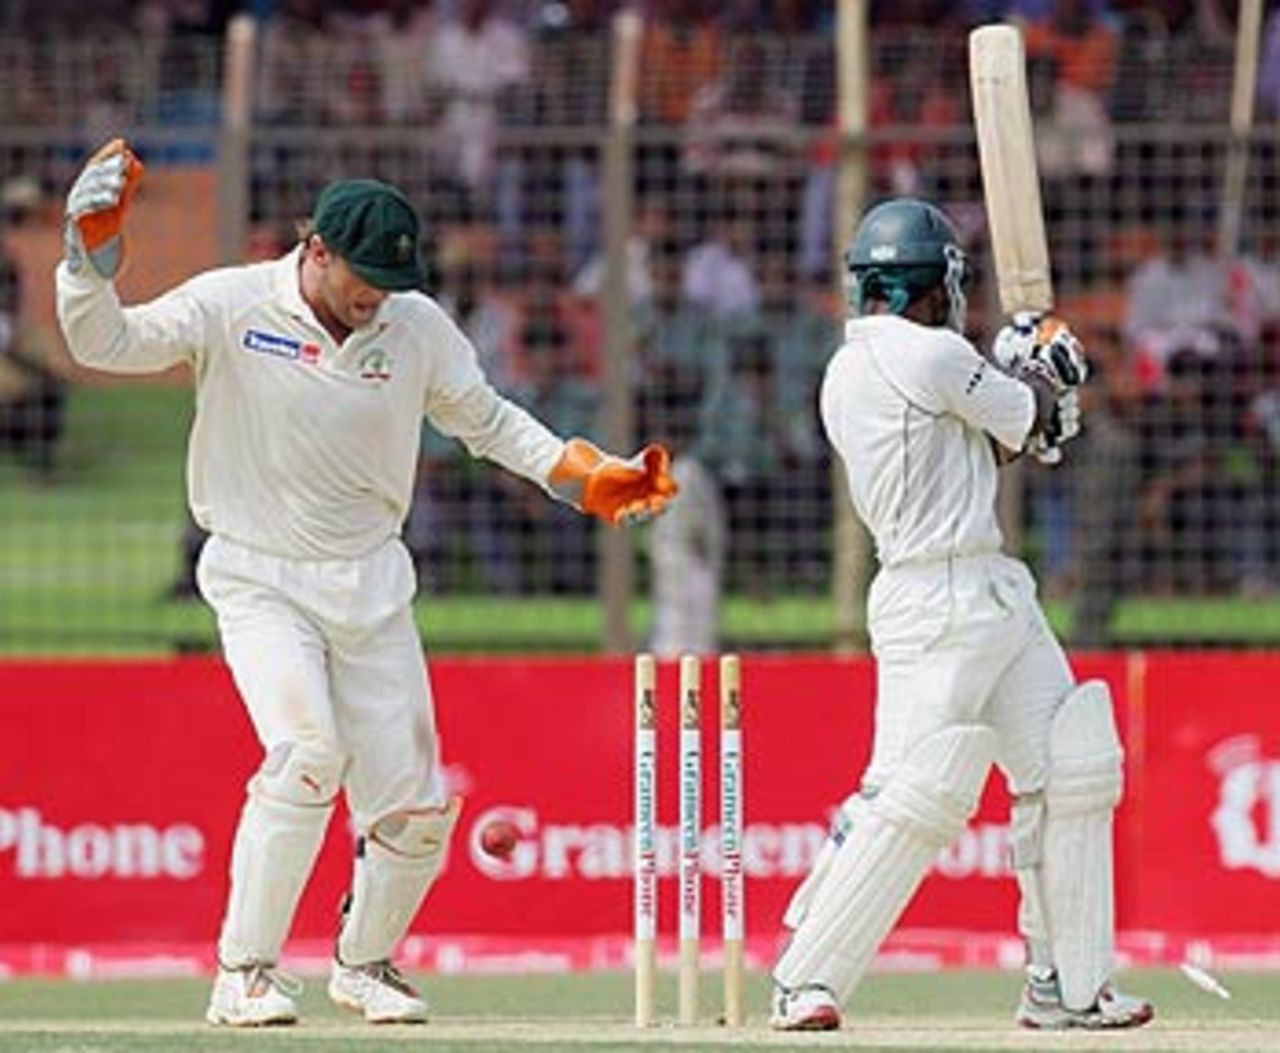 Adam Gilchrist looks on as Rajin Saleh is bowled for 71, Bangladesh v Australia, 2nd Test, Chittagong, 1st day, April 16, 2006